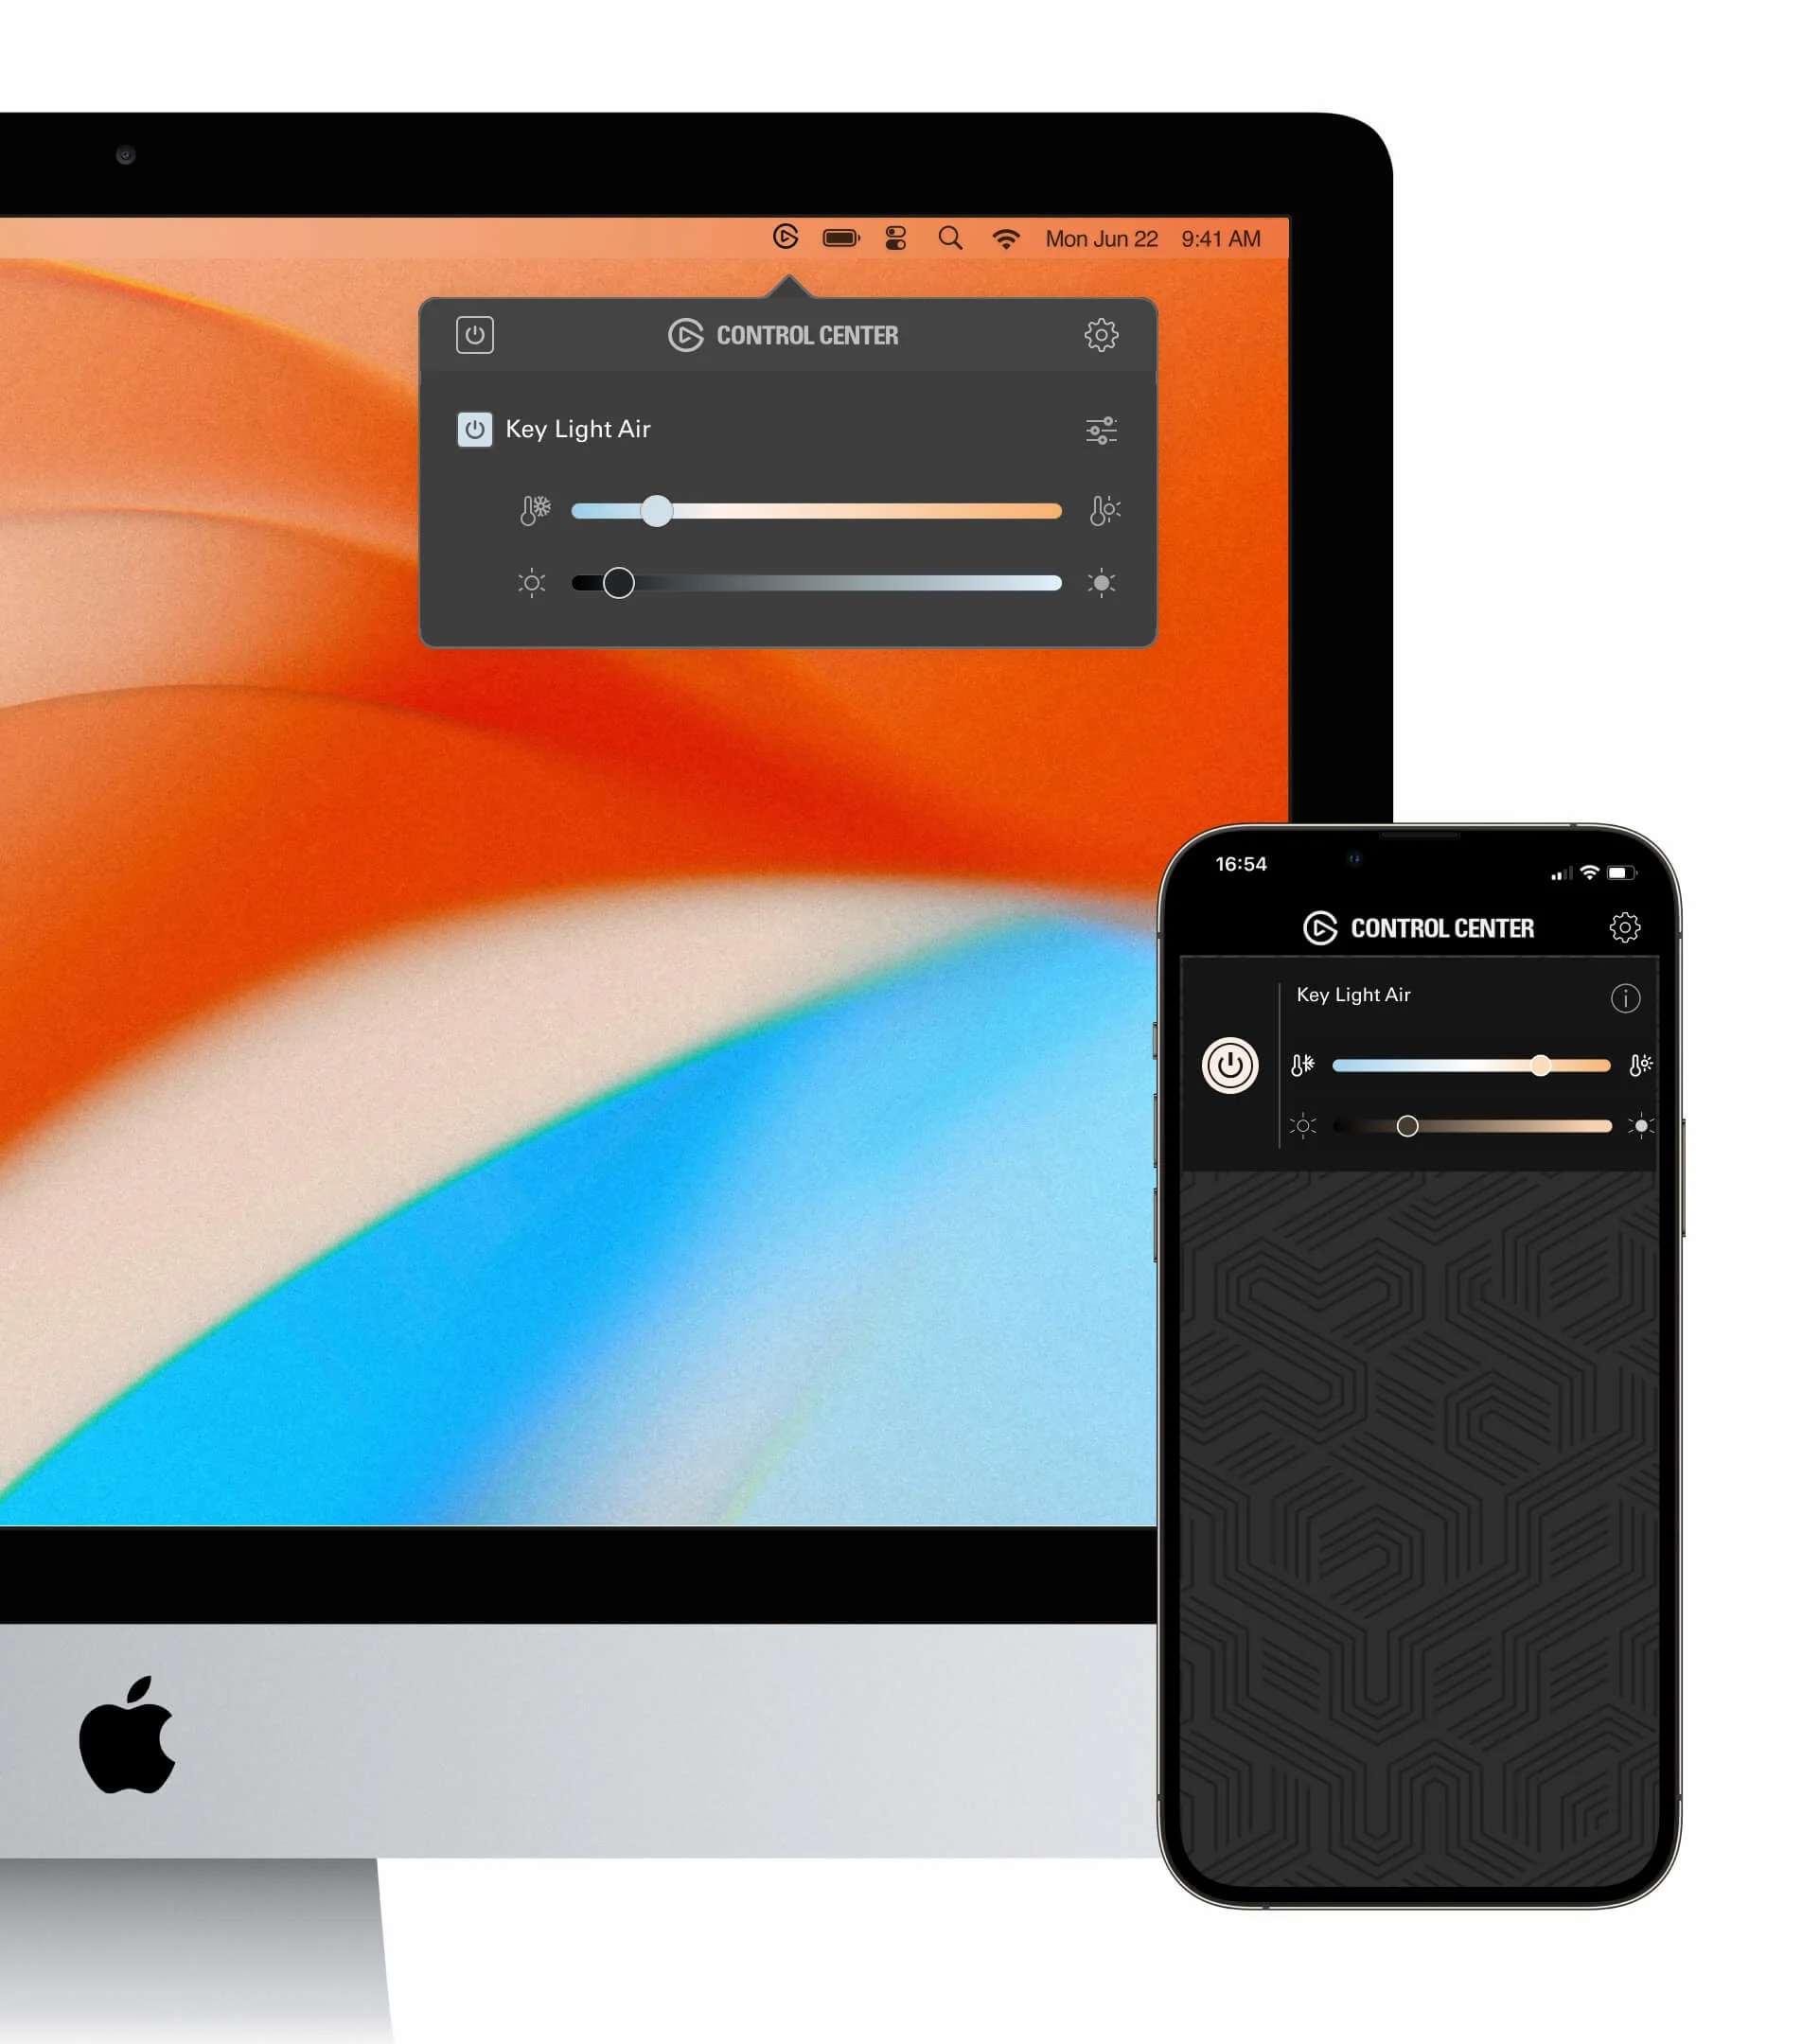 Key Light Air's Control Center software shown controlled on desktop and mobile app